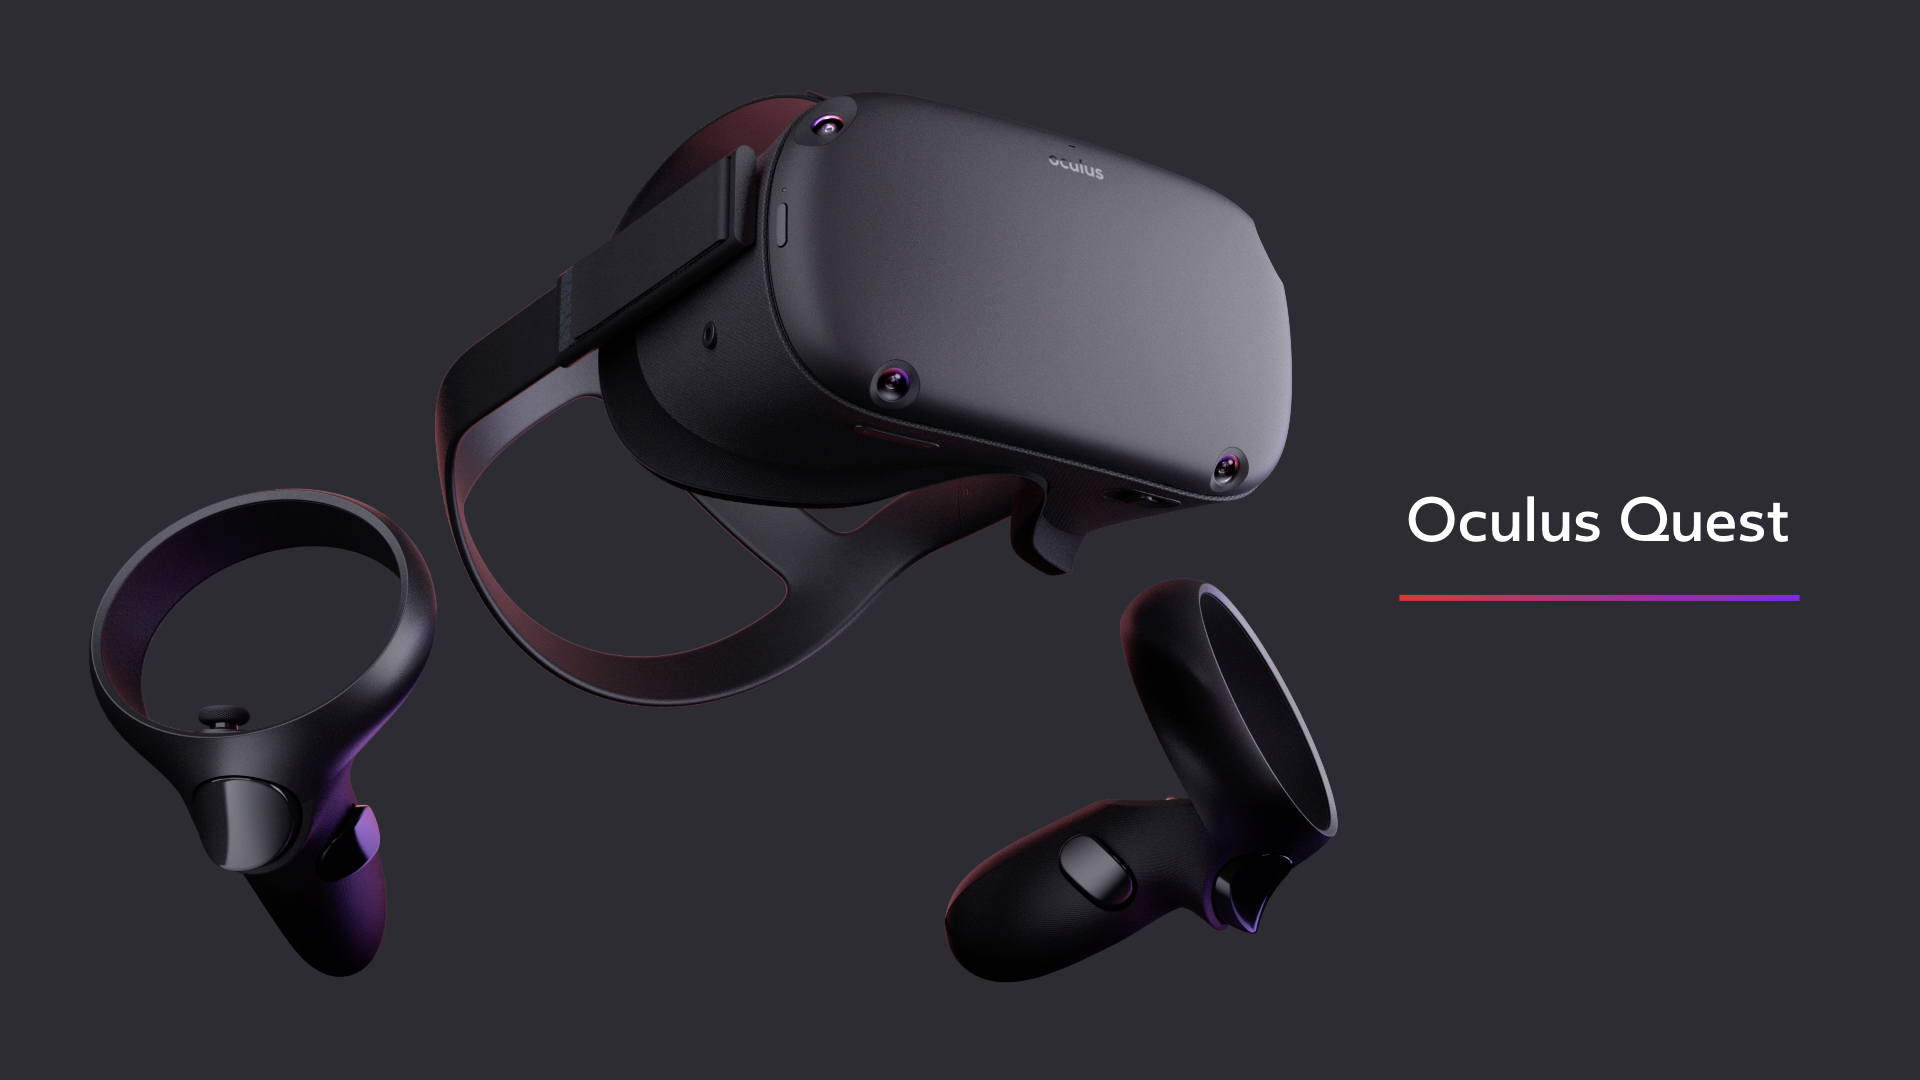 Introducing Oculus Quest A New All In One Vr System Coming Spring 2019 About Facebook